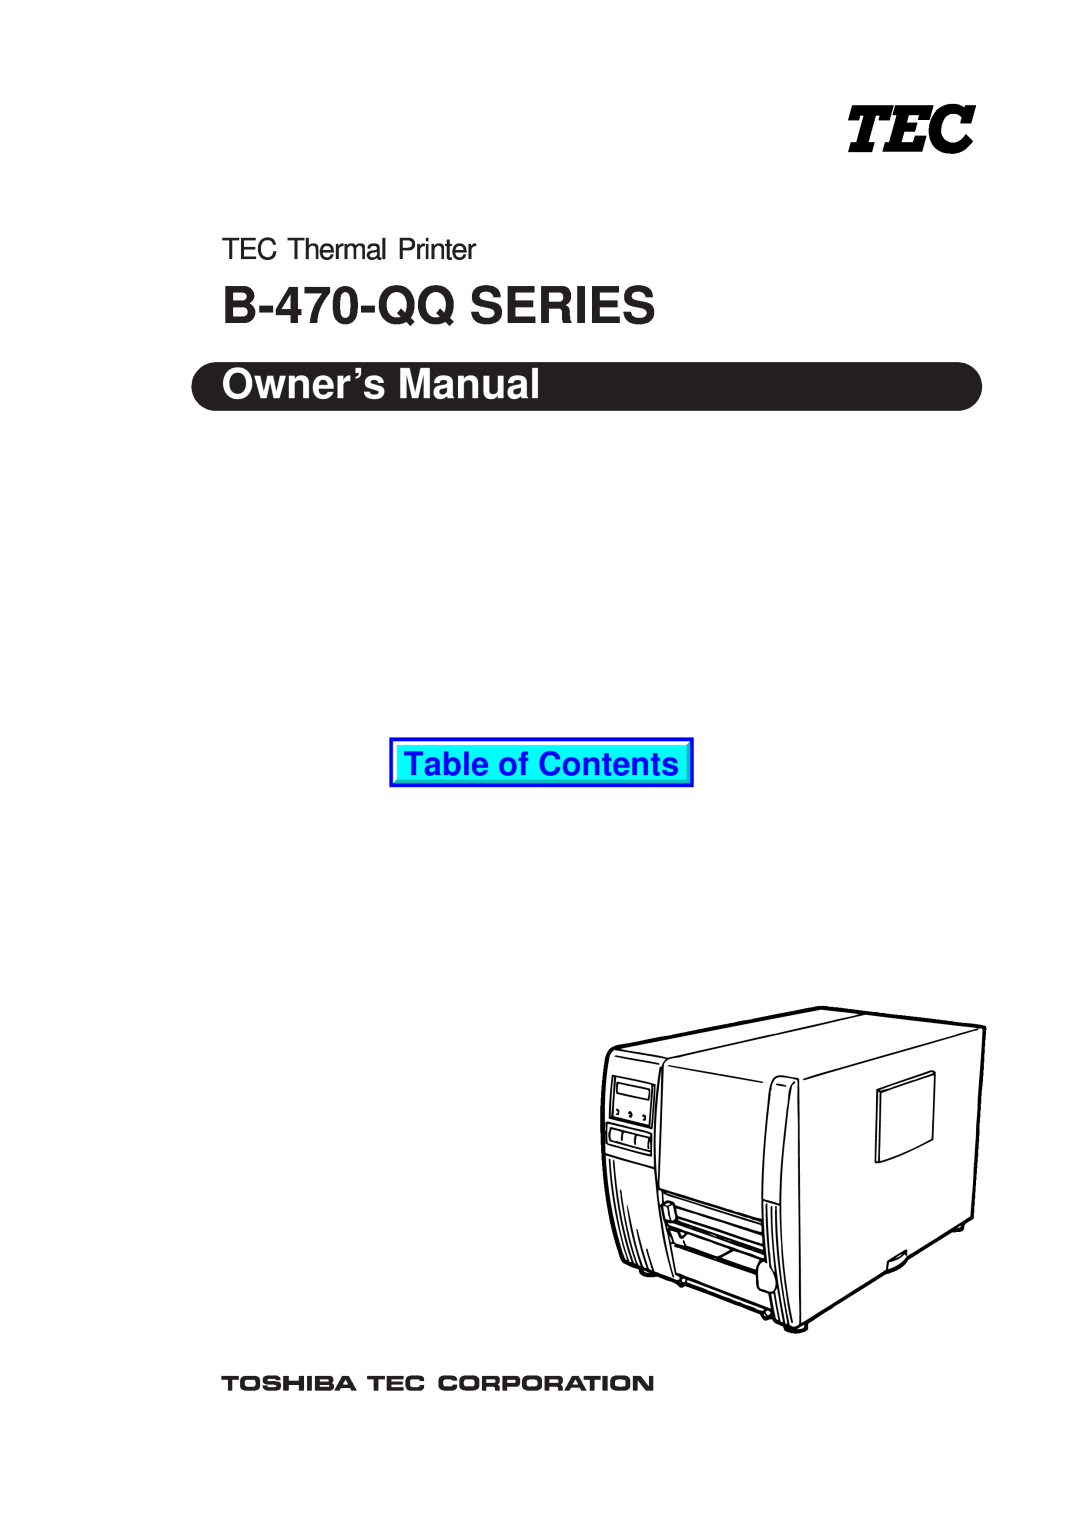 Toshiba EM1-33033E owner manual B-470-QQ SERIES, Owner’s Manual, Table of Contents, TEC Thermal Printer 